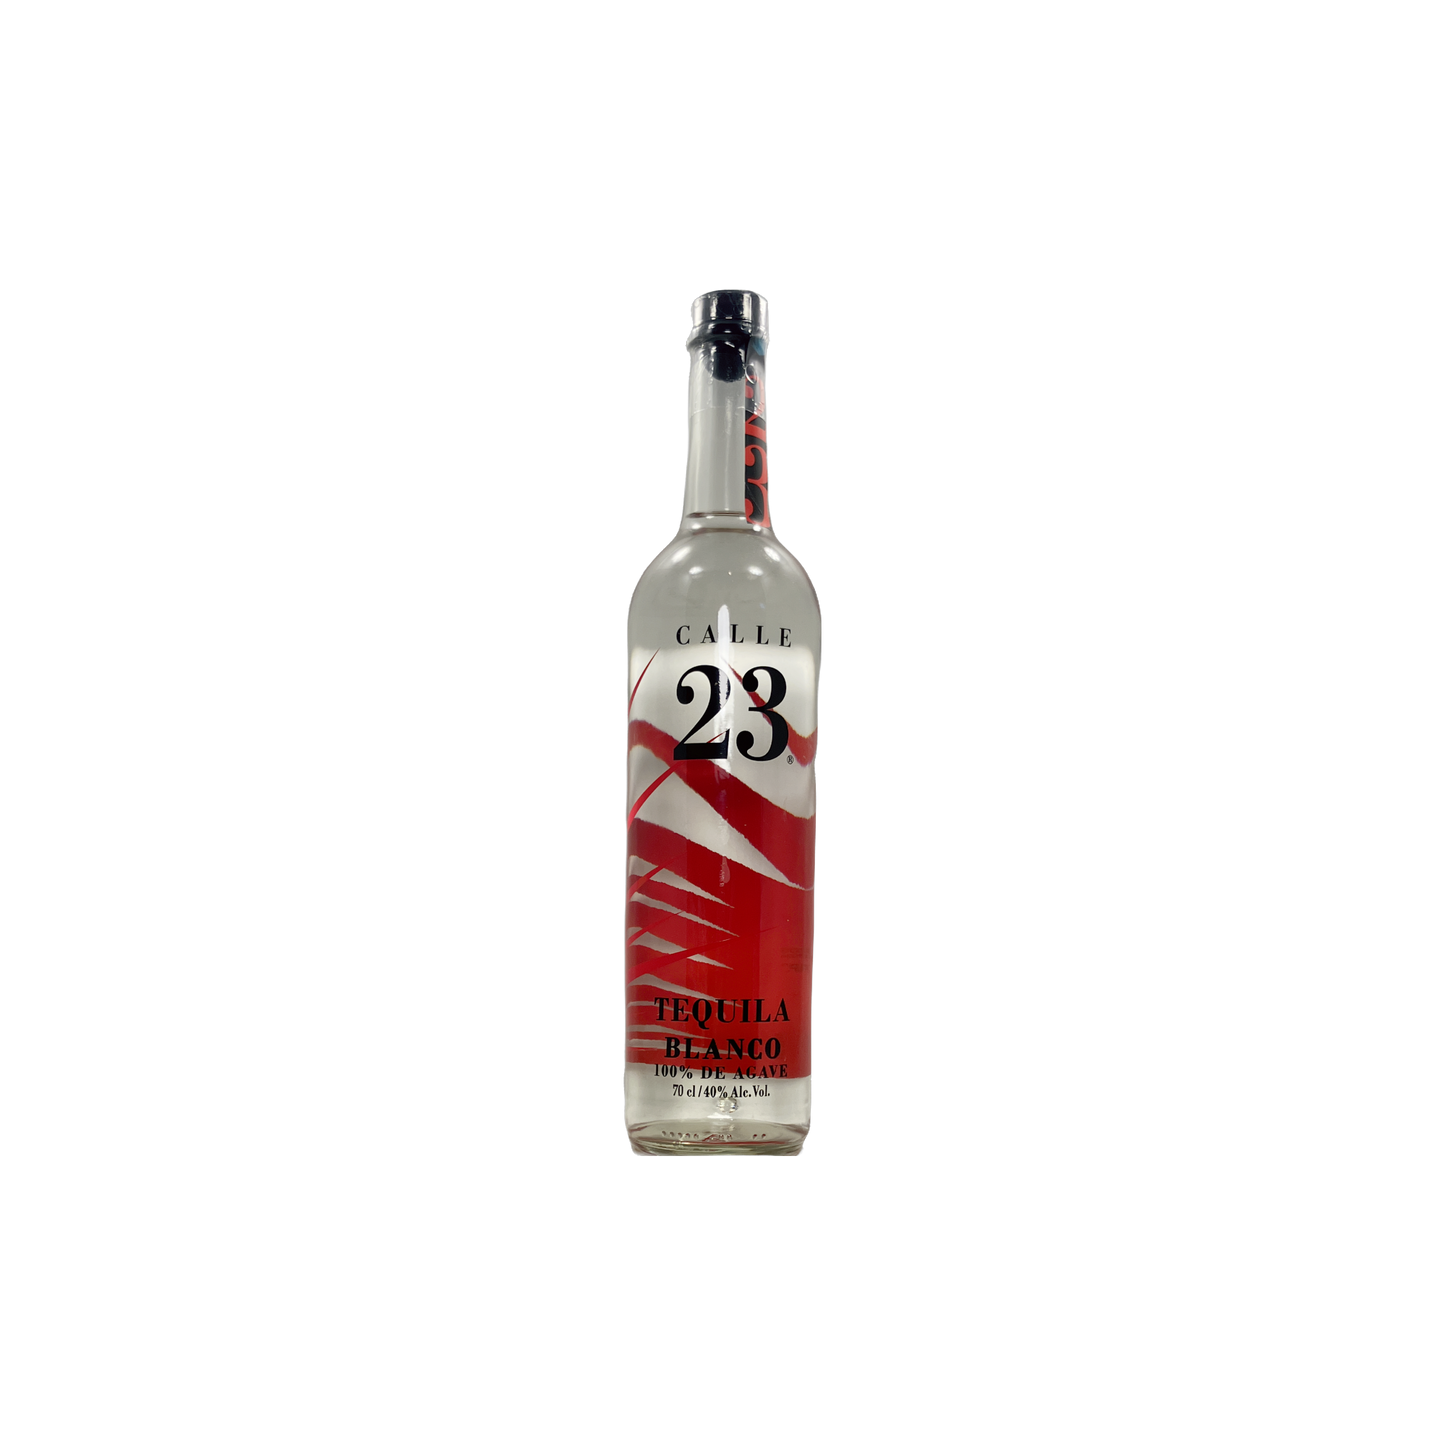 Calle 23 Tequila Blanco 700ml